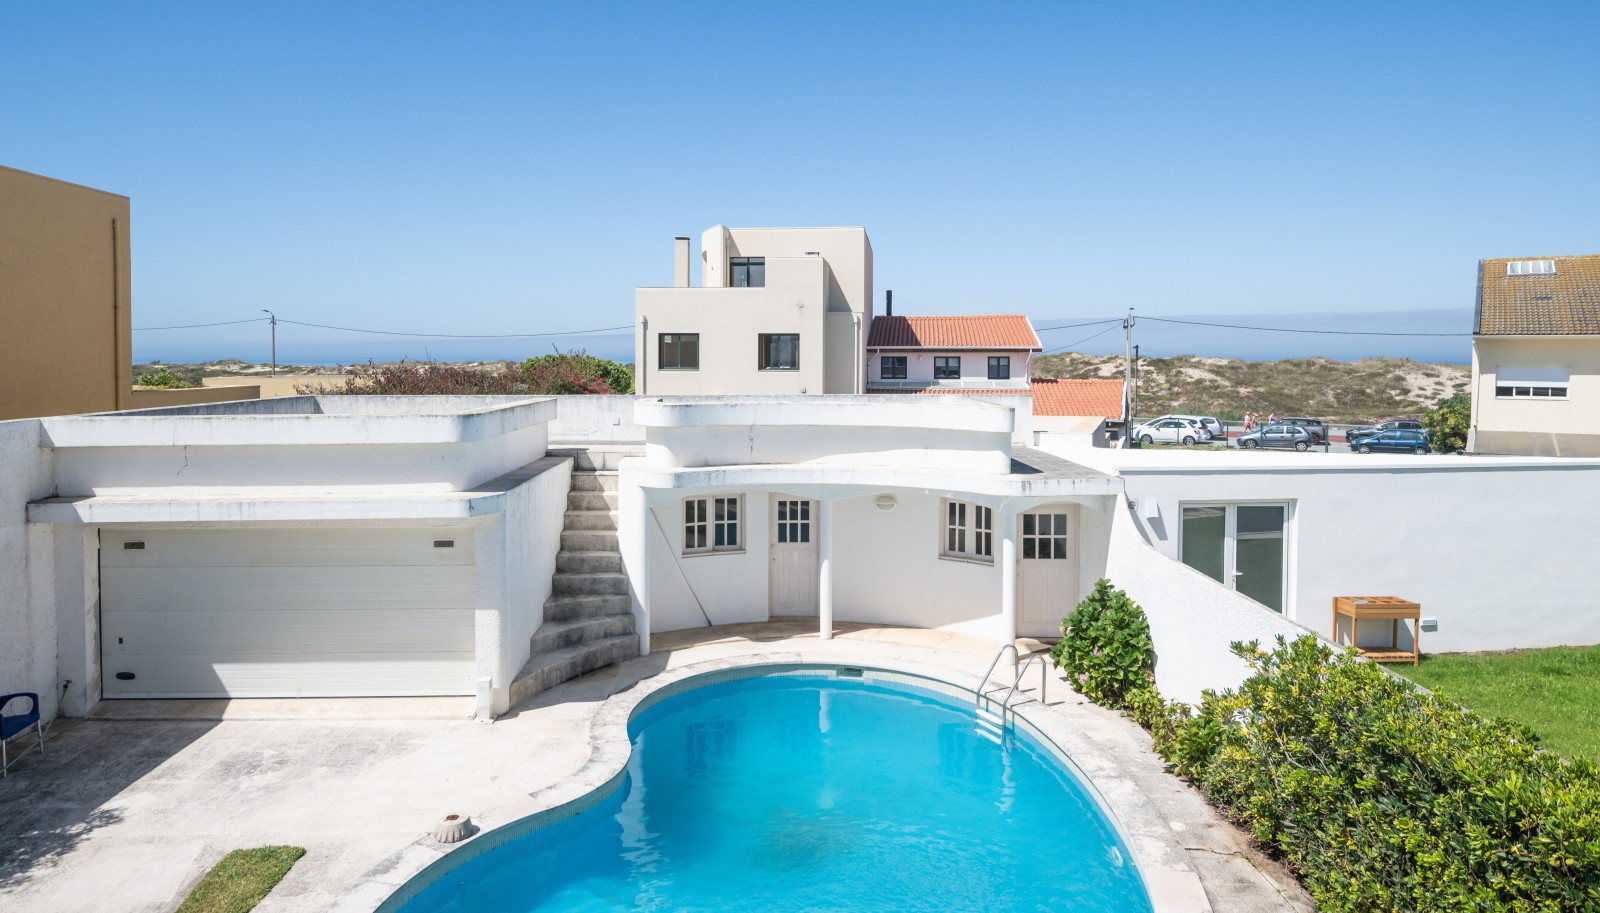 Sale: 3-bedroom villa with pool, on the 2nd line of the sea, in Miramar, V. N. Gaia, Portugal_235200